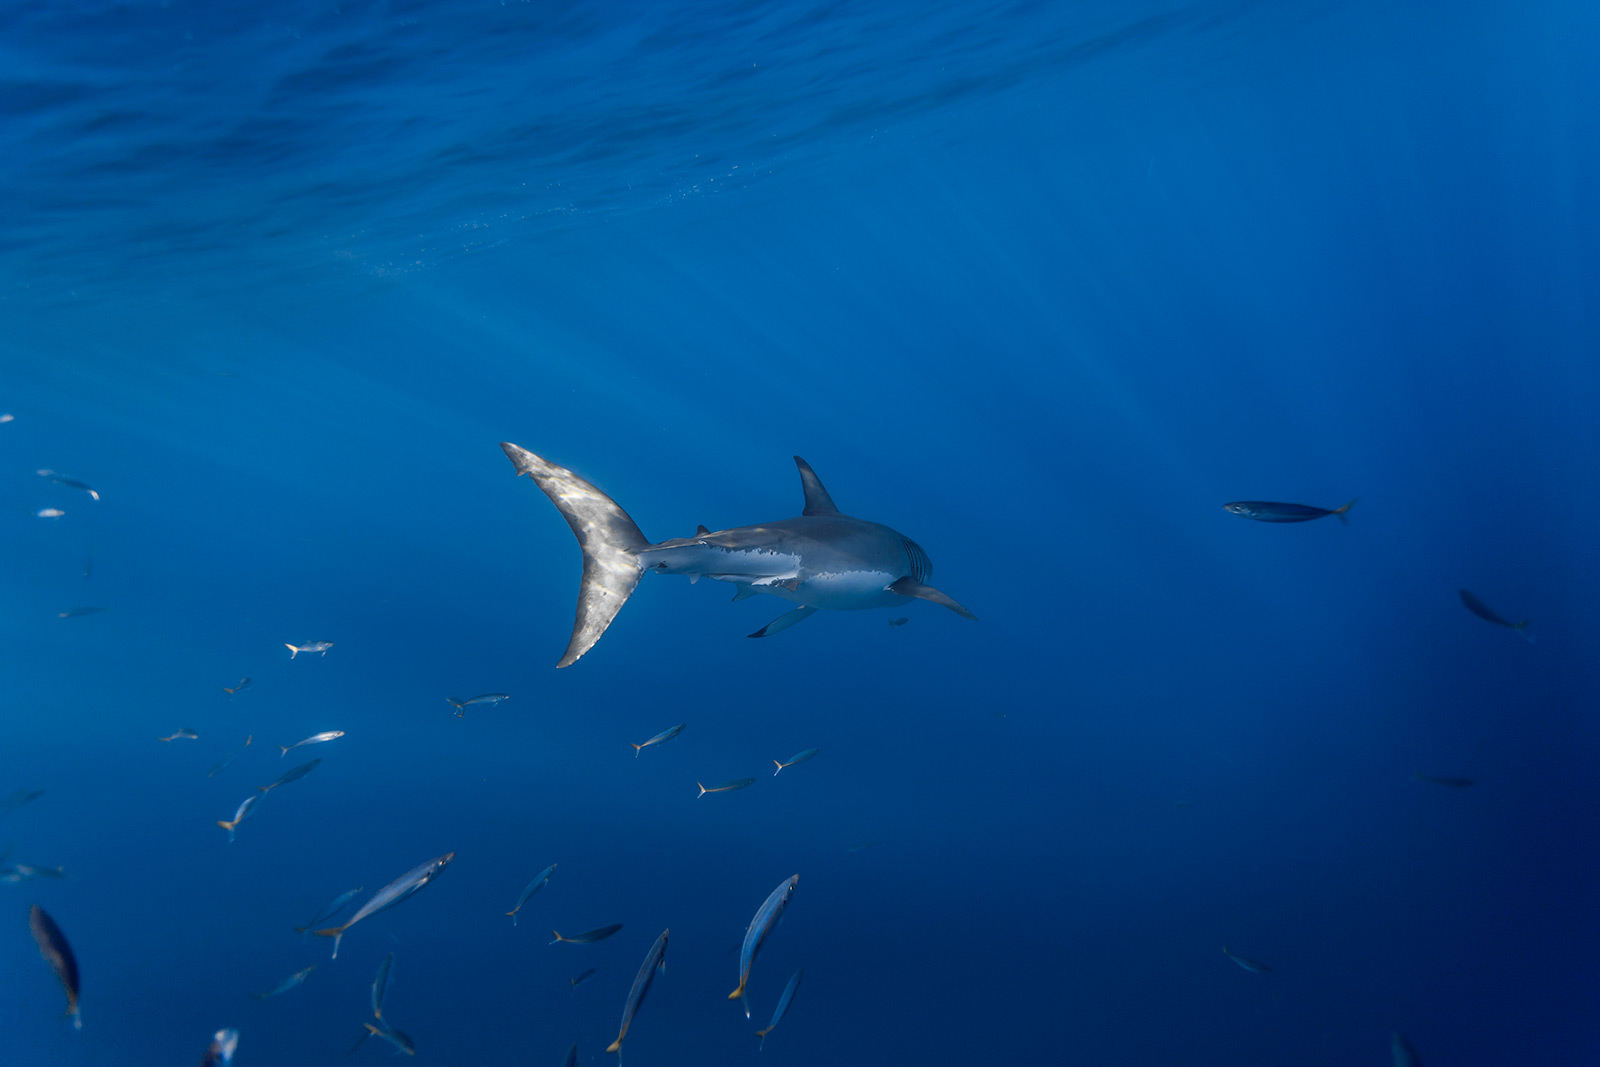 a great white shark swims away from the camera image